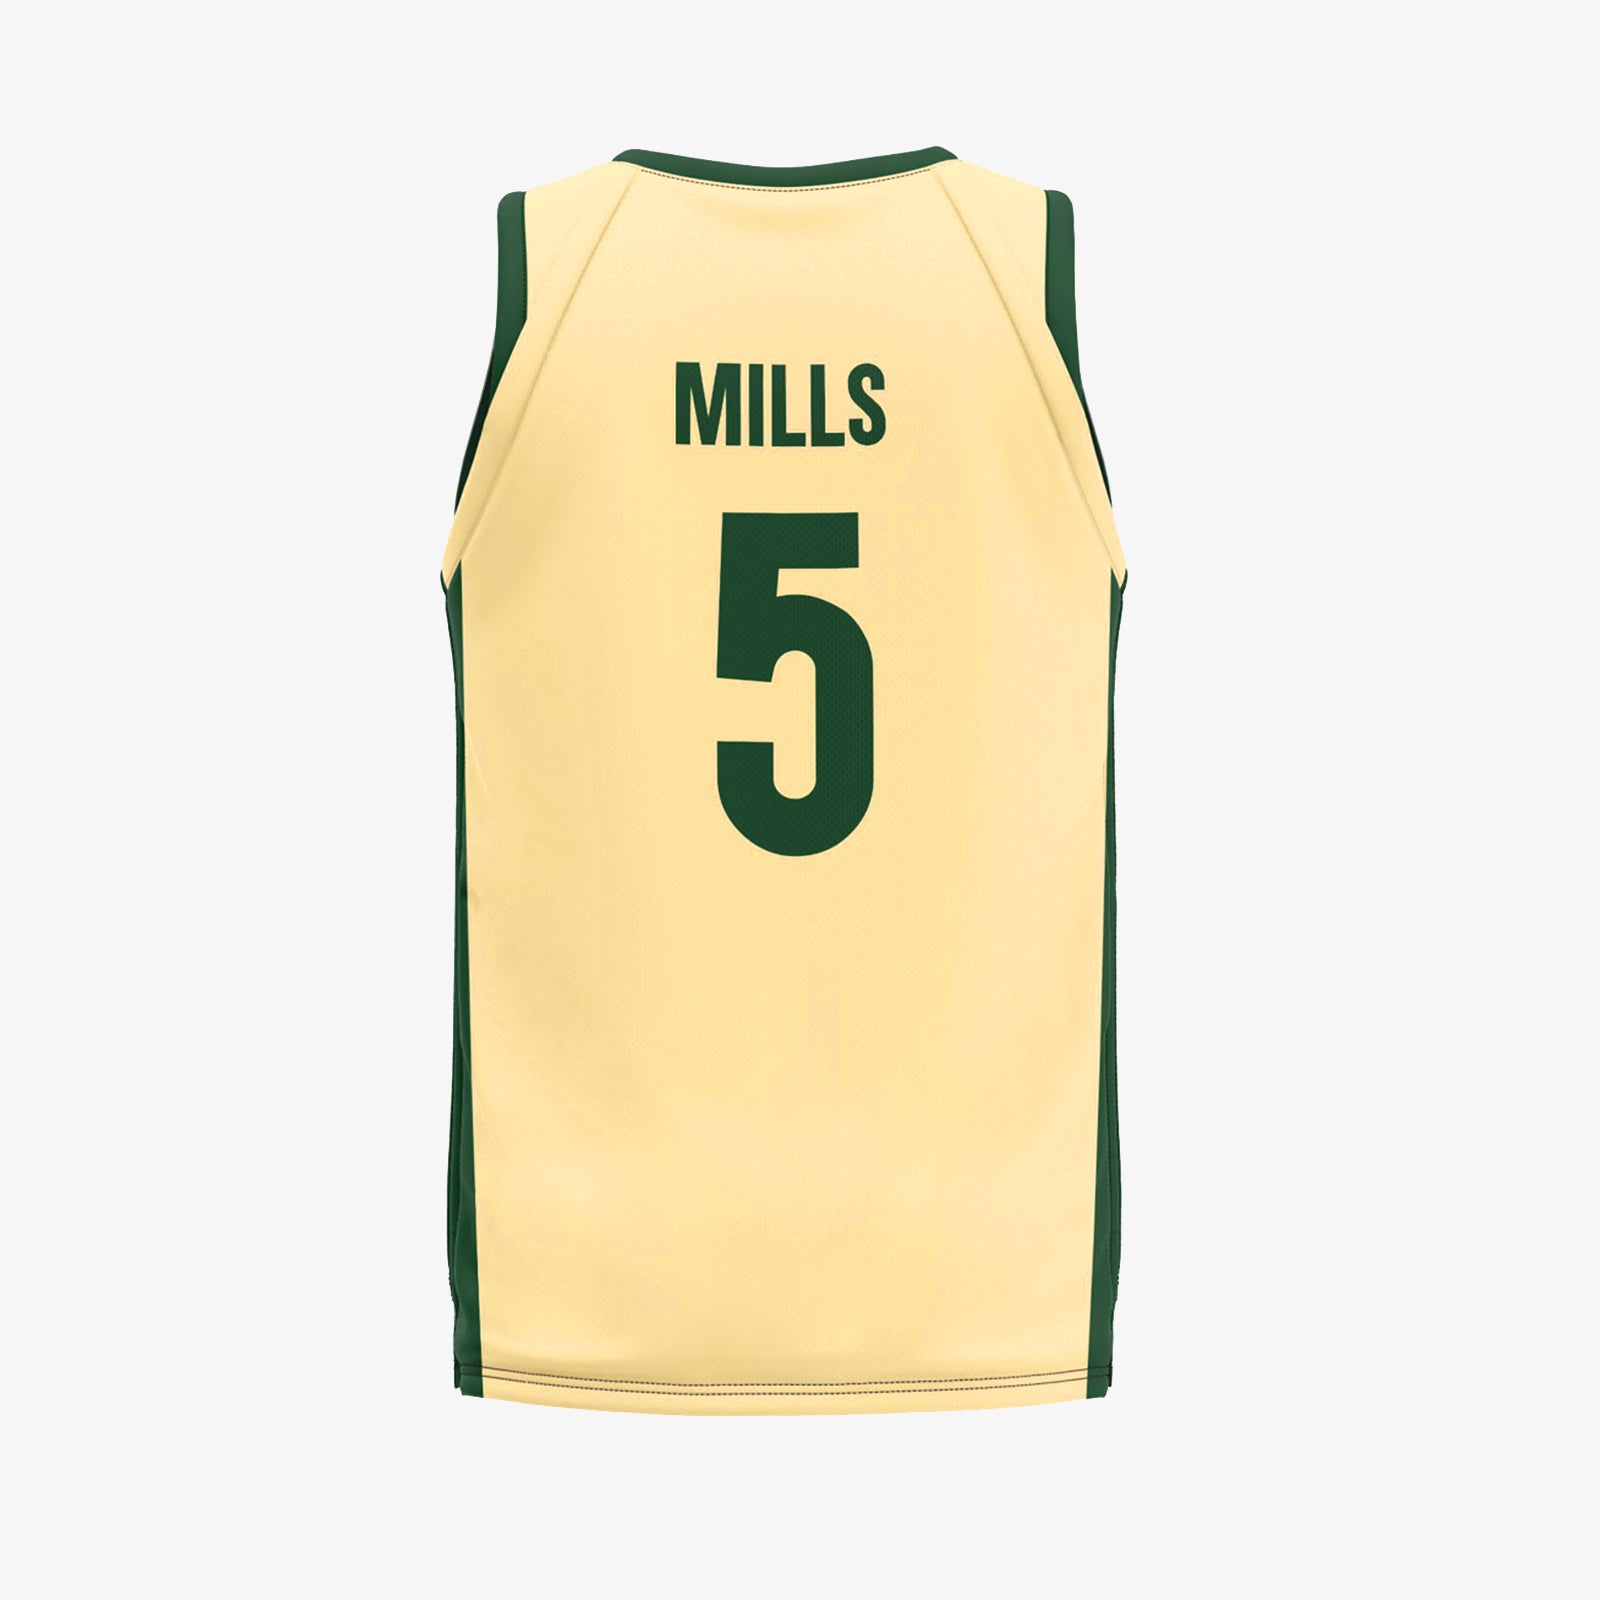 A jersey design concept for the Australia Boomers basketball team.